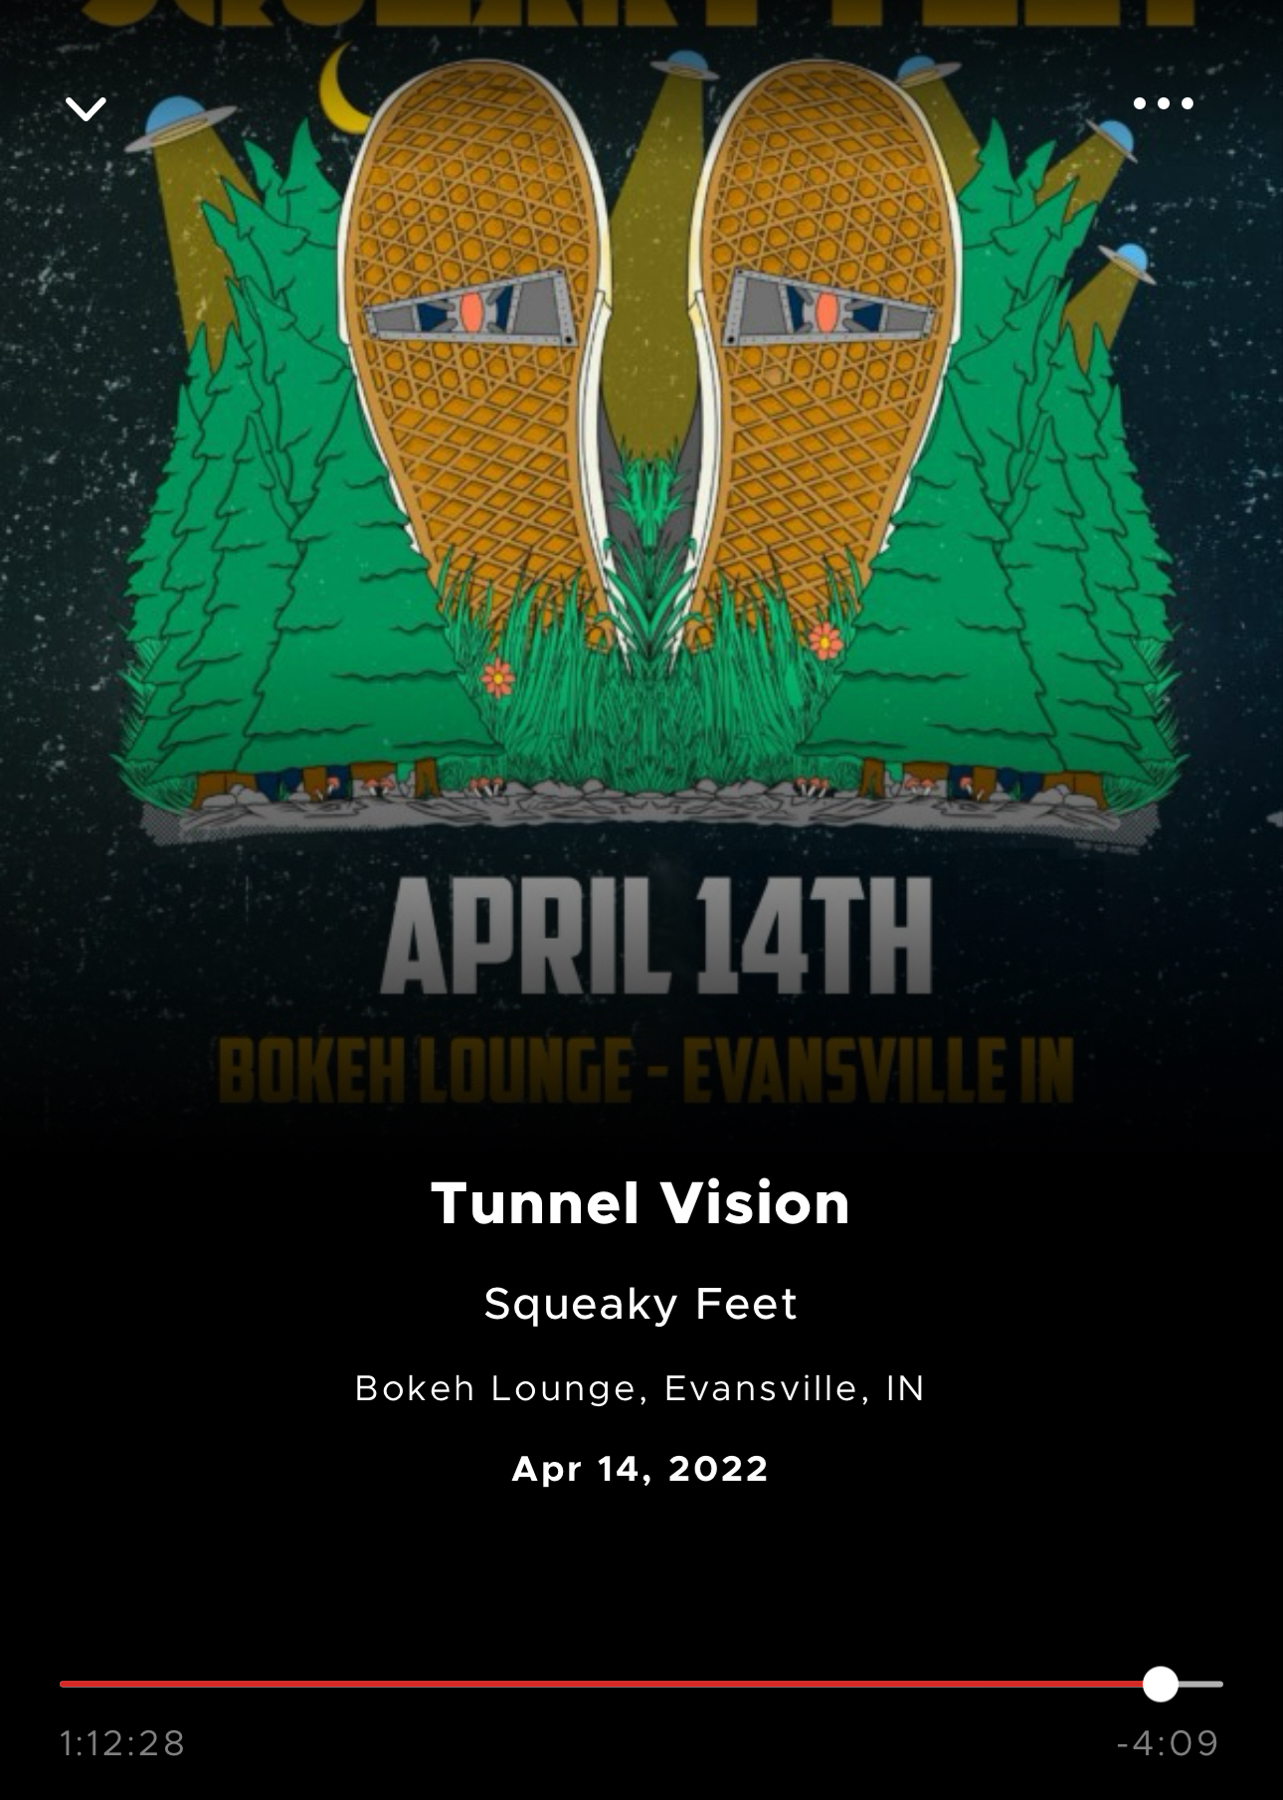 Album artwork for “Tunnel Vision” by Squeaky Feet showing stylized yellow shoes with eyes, surrounded by green trees against a starry night backdrop. Event details for April 14 at Bokeh Lounge, Evansville, IN, are included